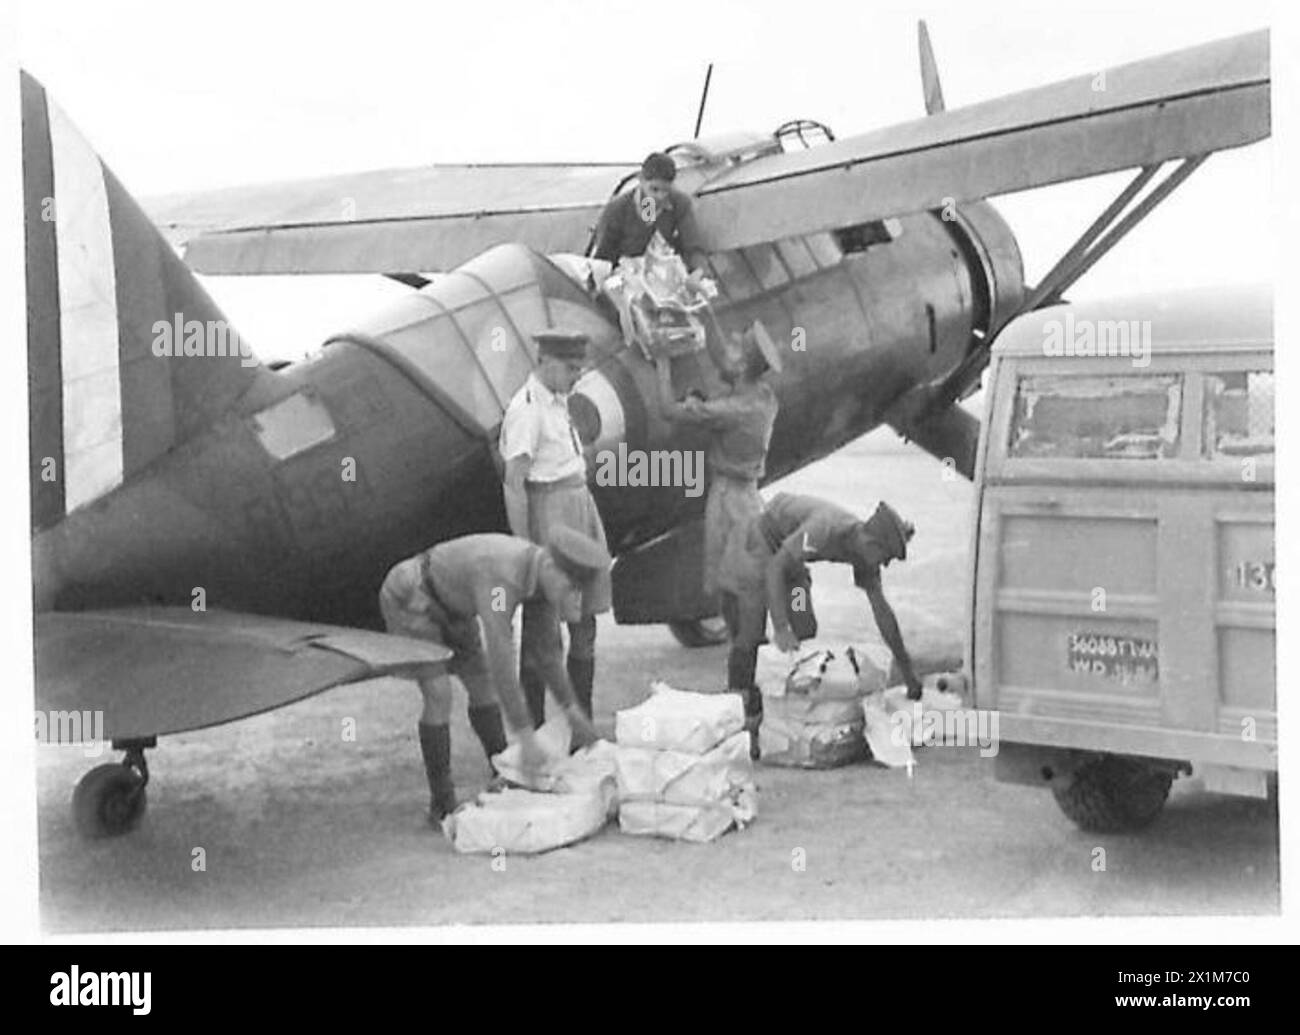 DESERT NEWSPAPER SERVICE FOR THE TROOPS - The bundles of newspapers and periodicals being unloaded ready for livery. Lysander Mk.l 890 h.p. Bristol Mercury engine, British Army Stock Photo